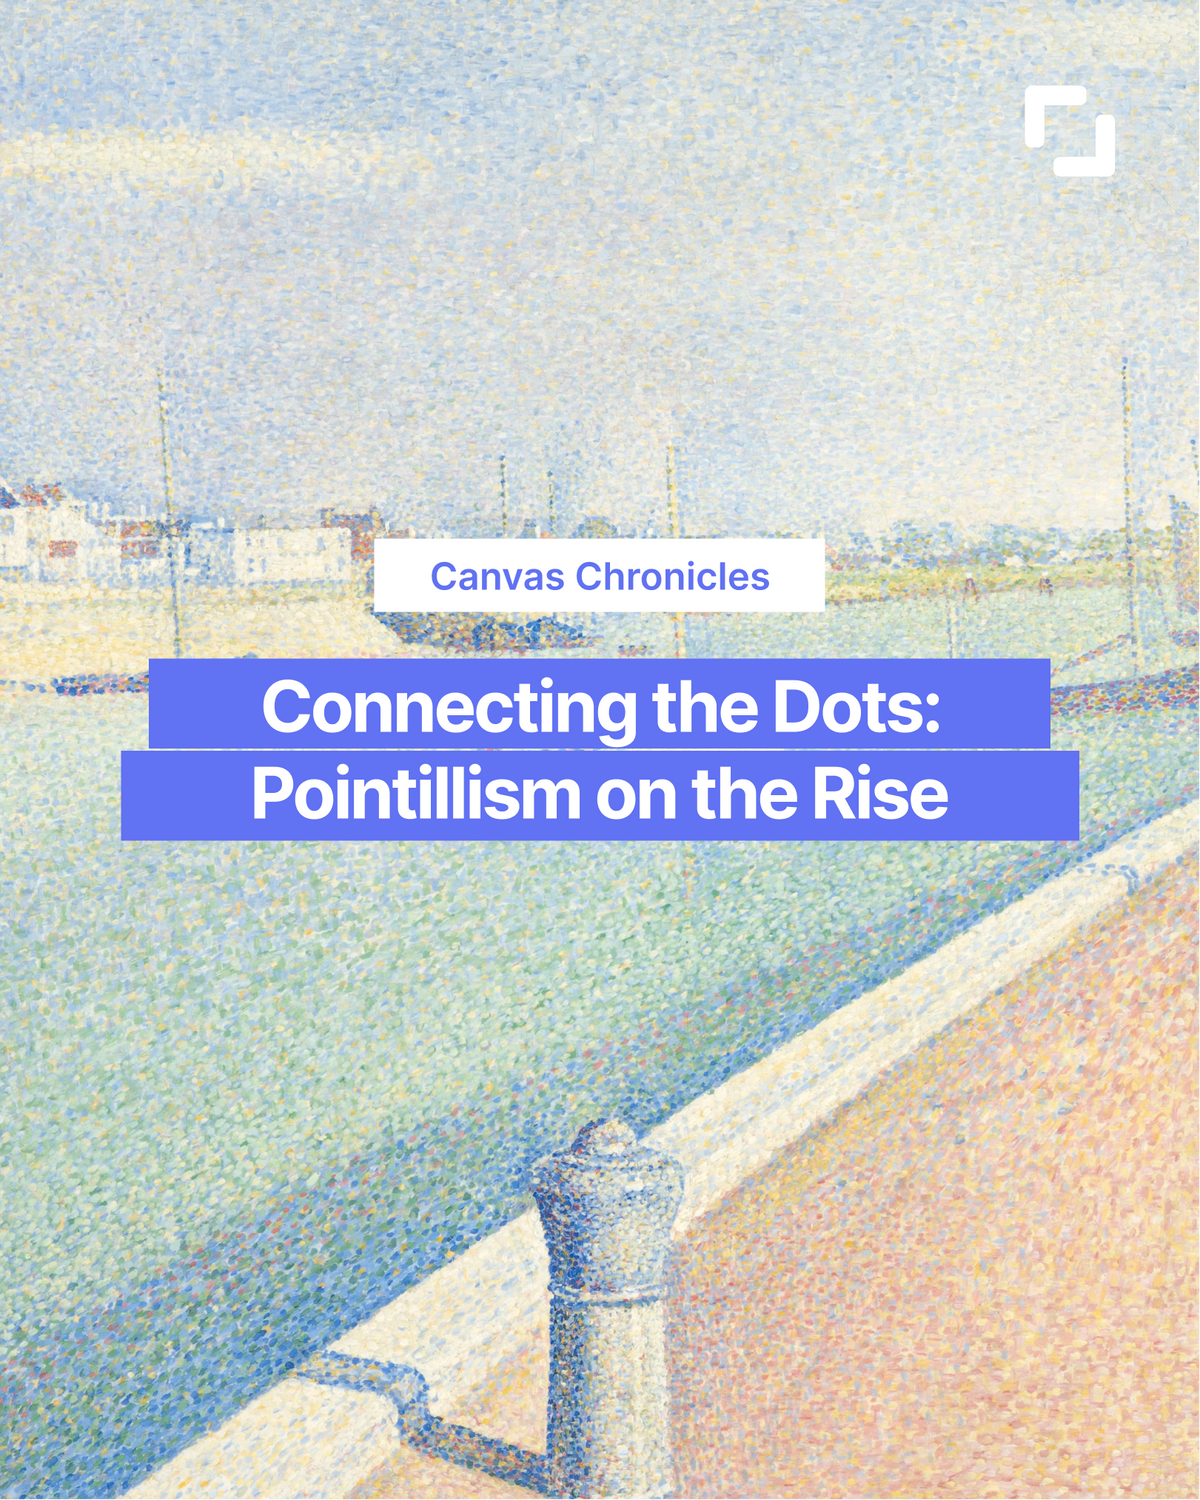 Connecting the Dots: Pointillism on the Rise